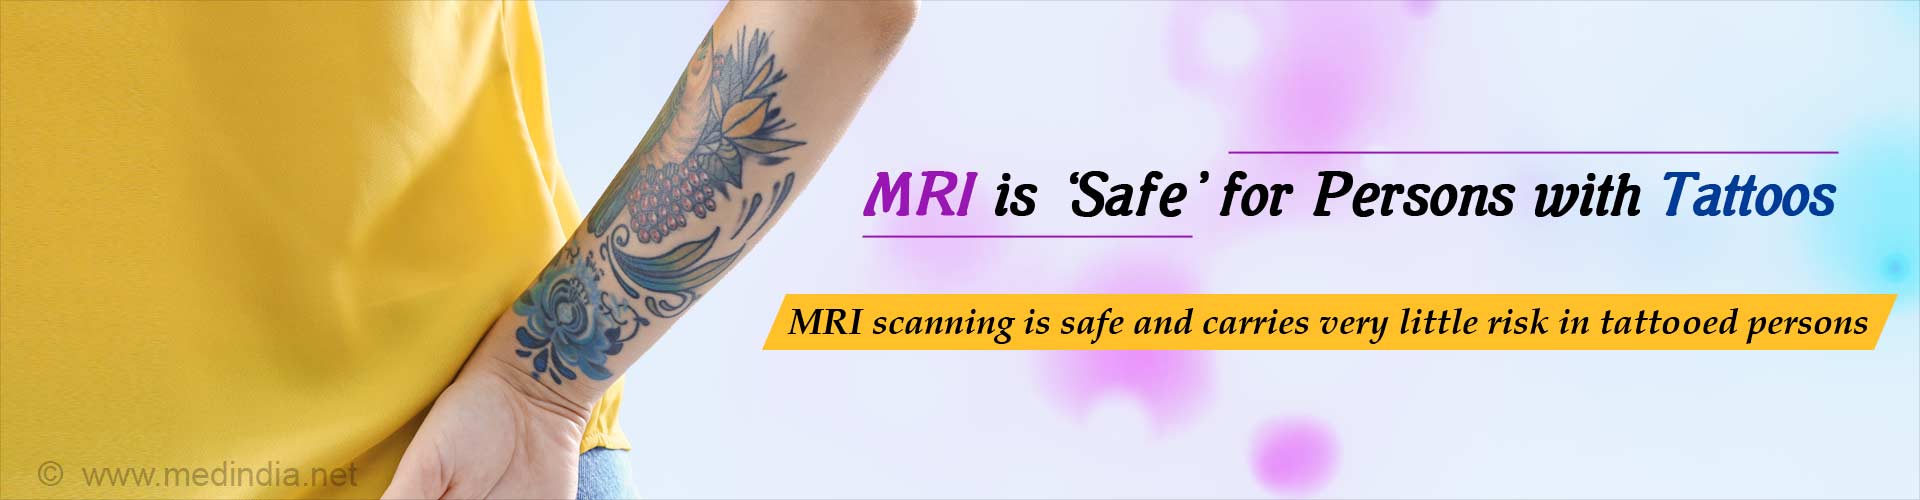 MRI is safe for persons with tattoos. MRI scanning is safe and carries very little risk in tattooed persons.